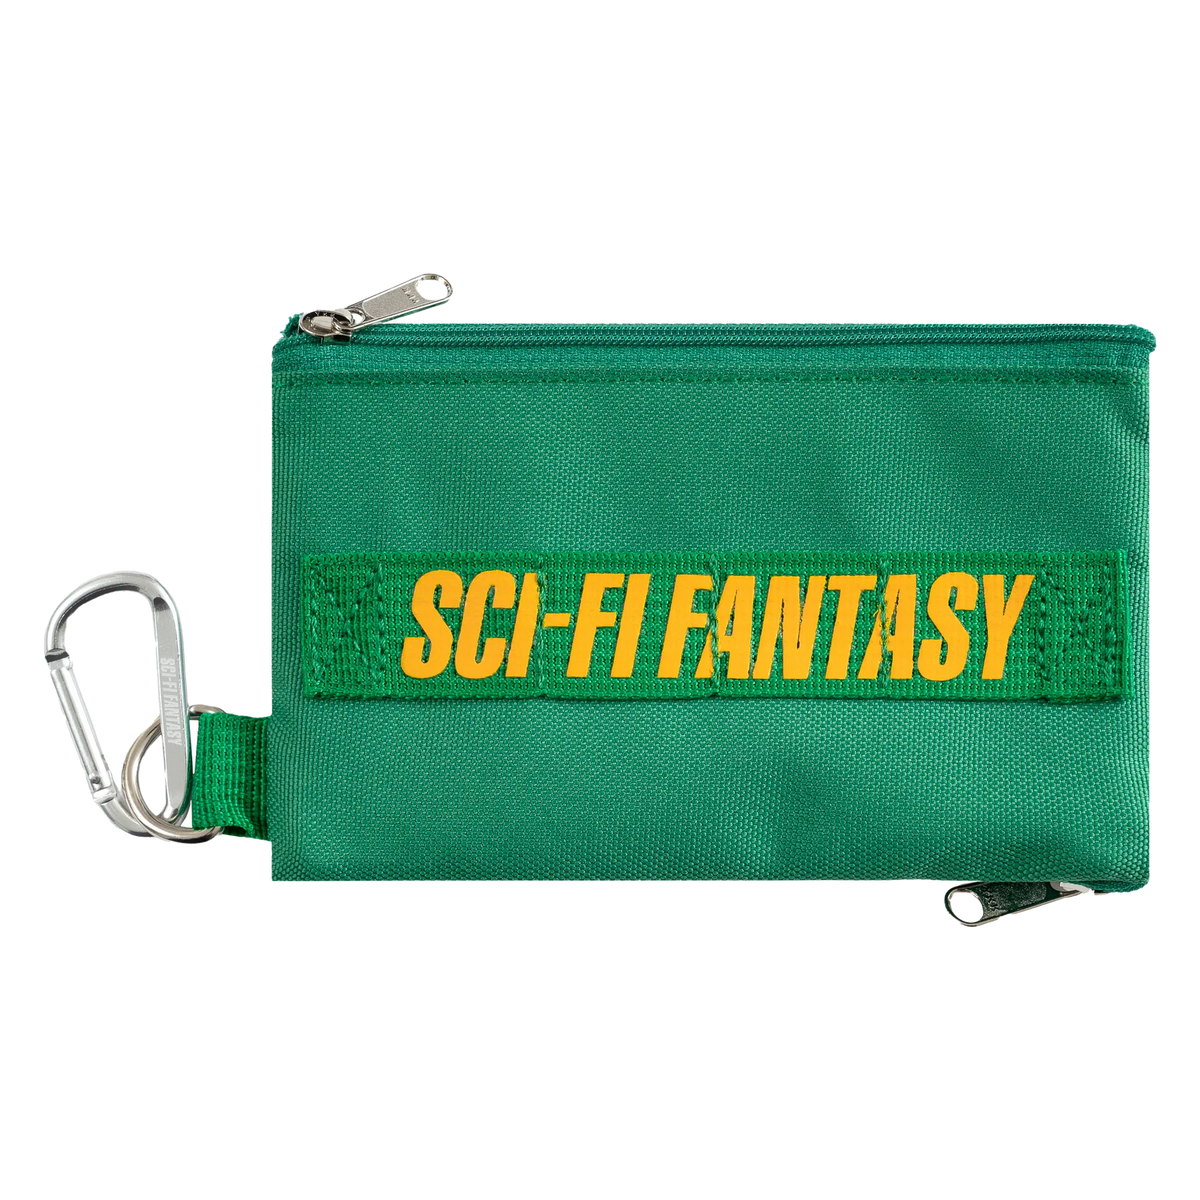 Sci-Fi Fantasy Carry All Pouch - Green